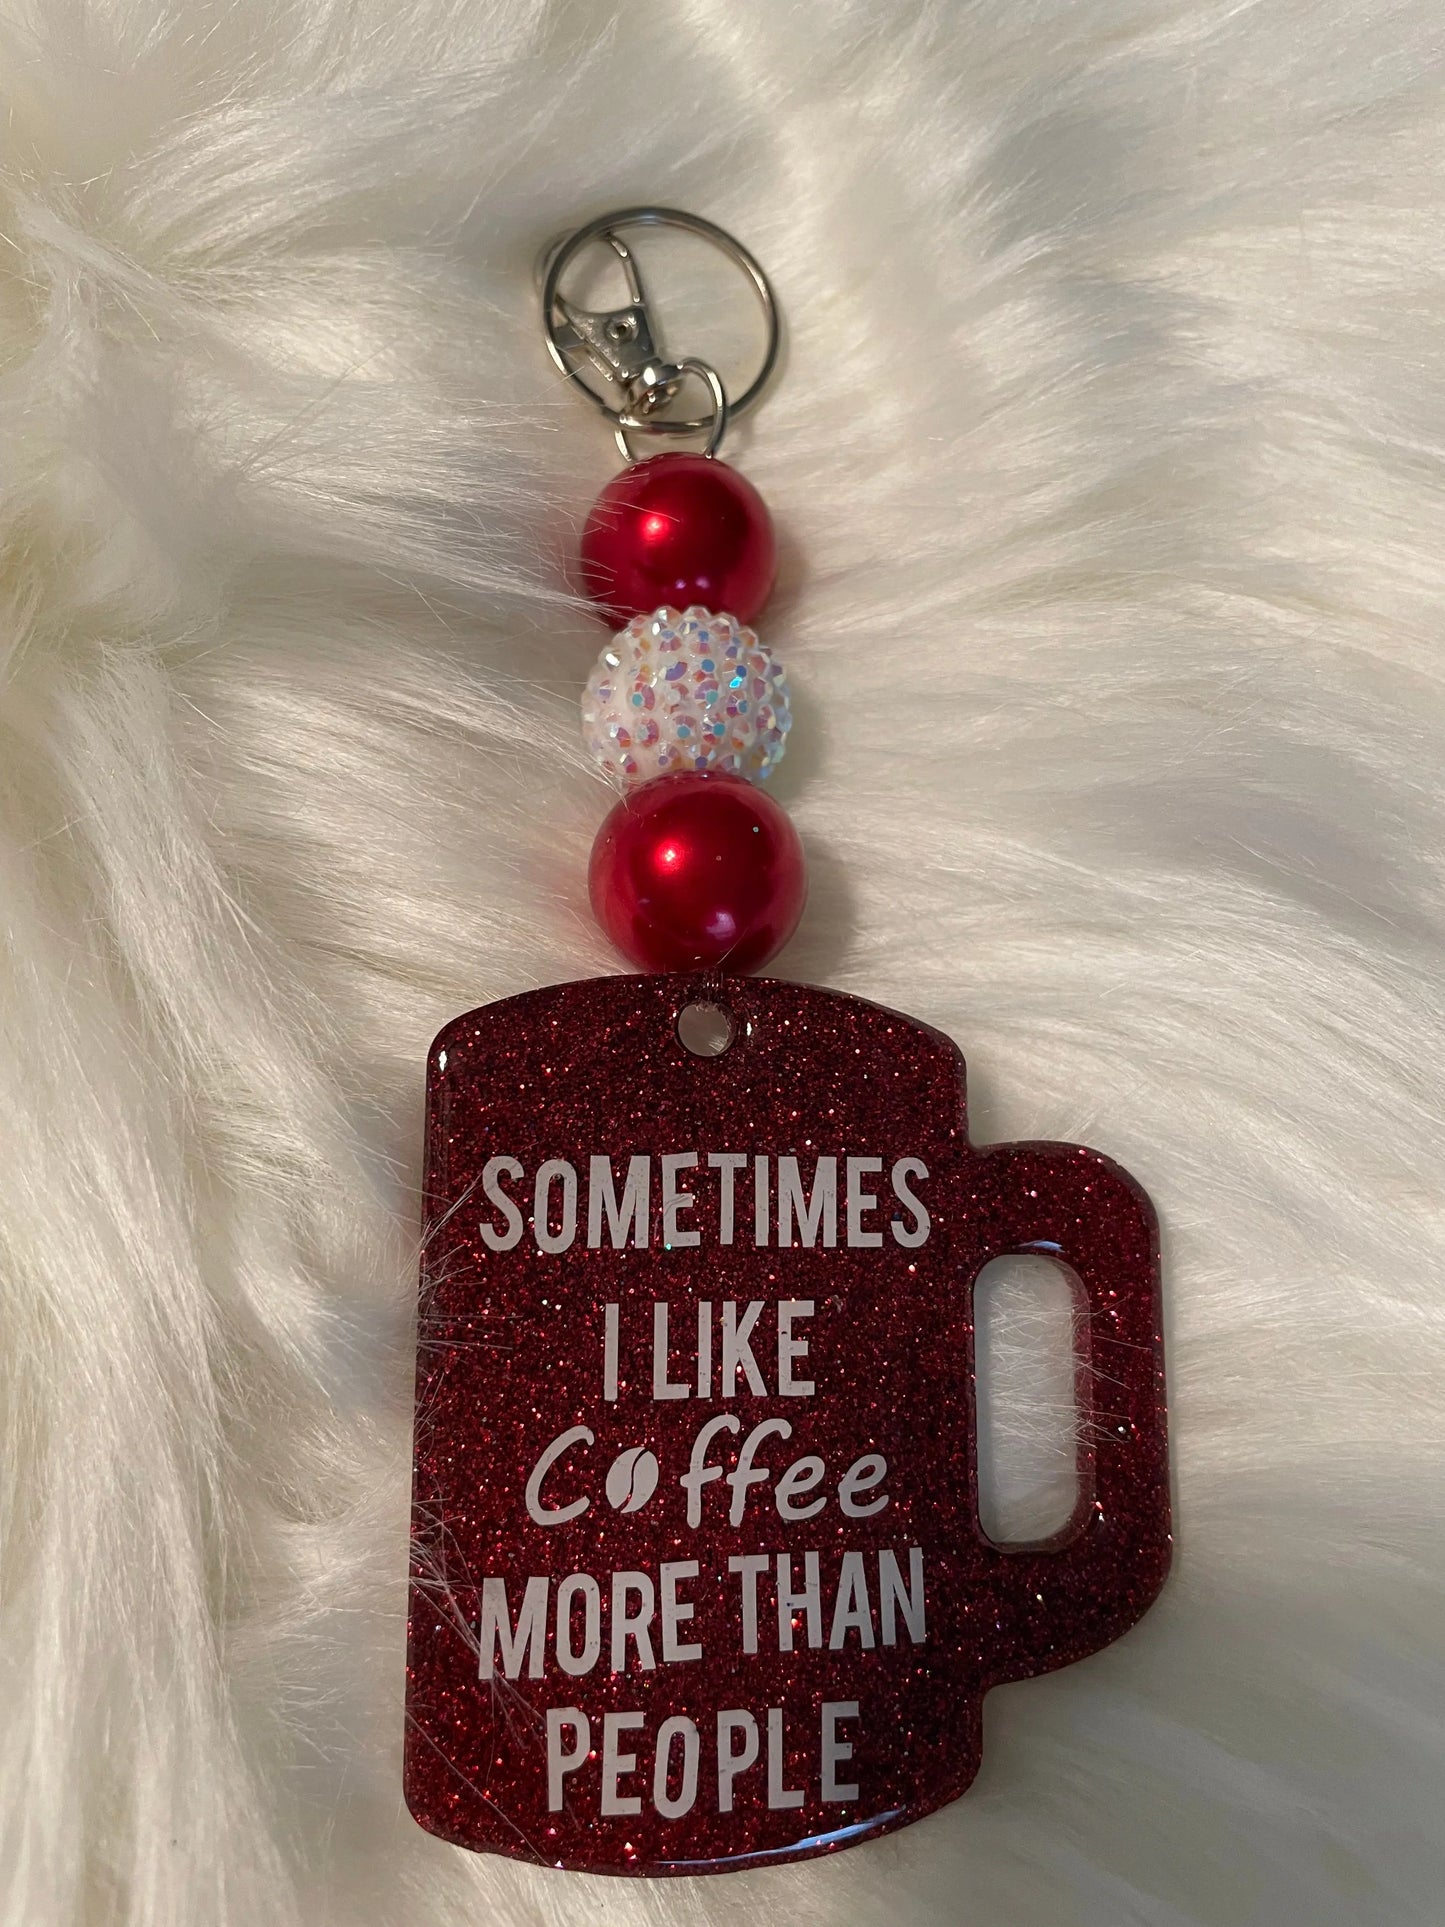 Sometimes I like Coffee more than People Keychain Donna Gail's Designs